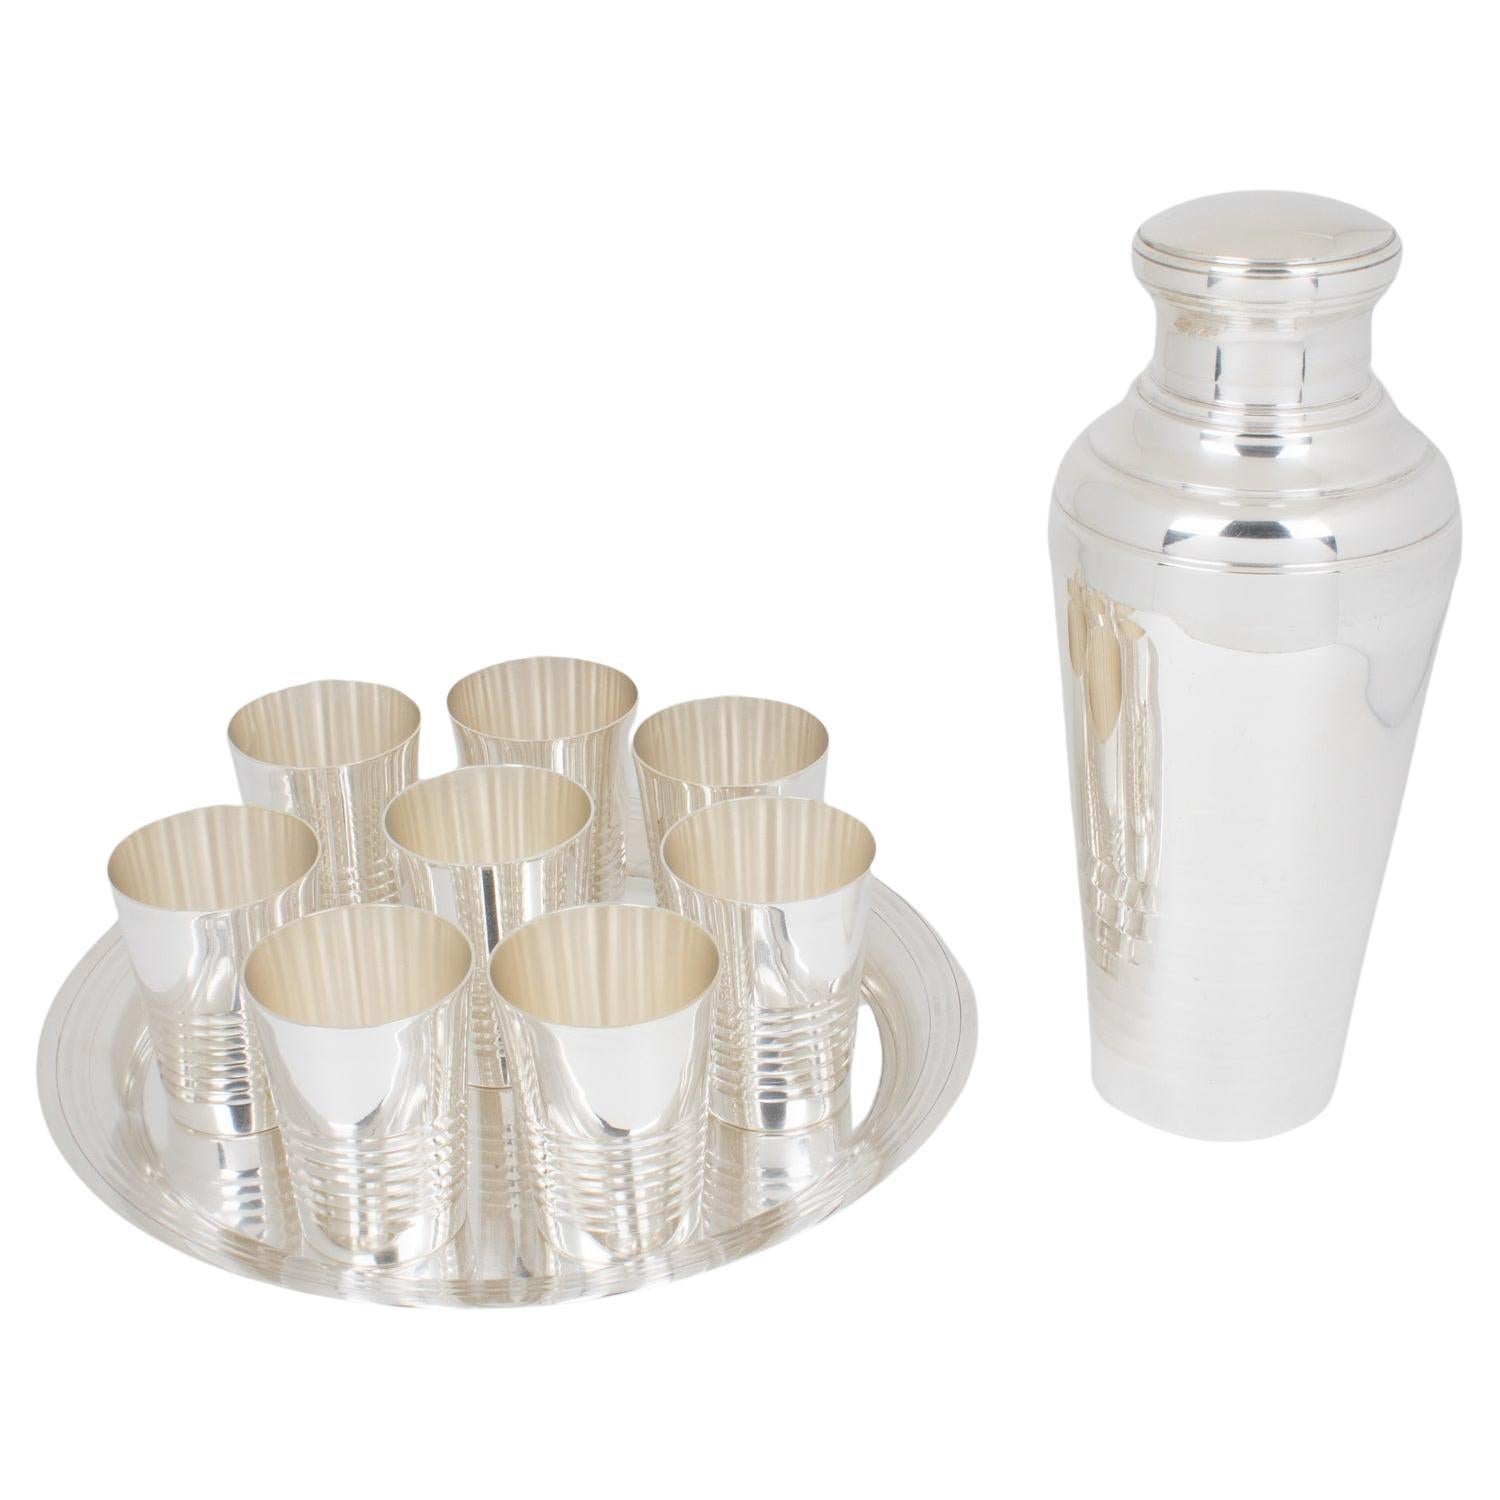 https://a.1stdibscdn.com/art-deco-barware-silver-plate-cocktail-shaker-eight-glasses-and-tray-set-1940s-for-sale/f_16322/f_372567621701056355882/f_37256762_1701056356344_bg_processed.jpg?width=1500